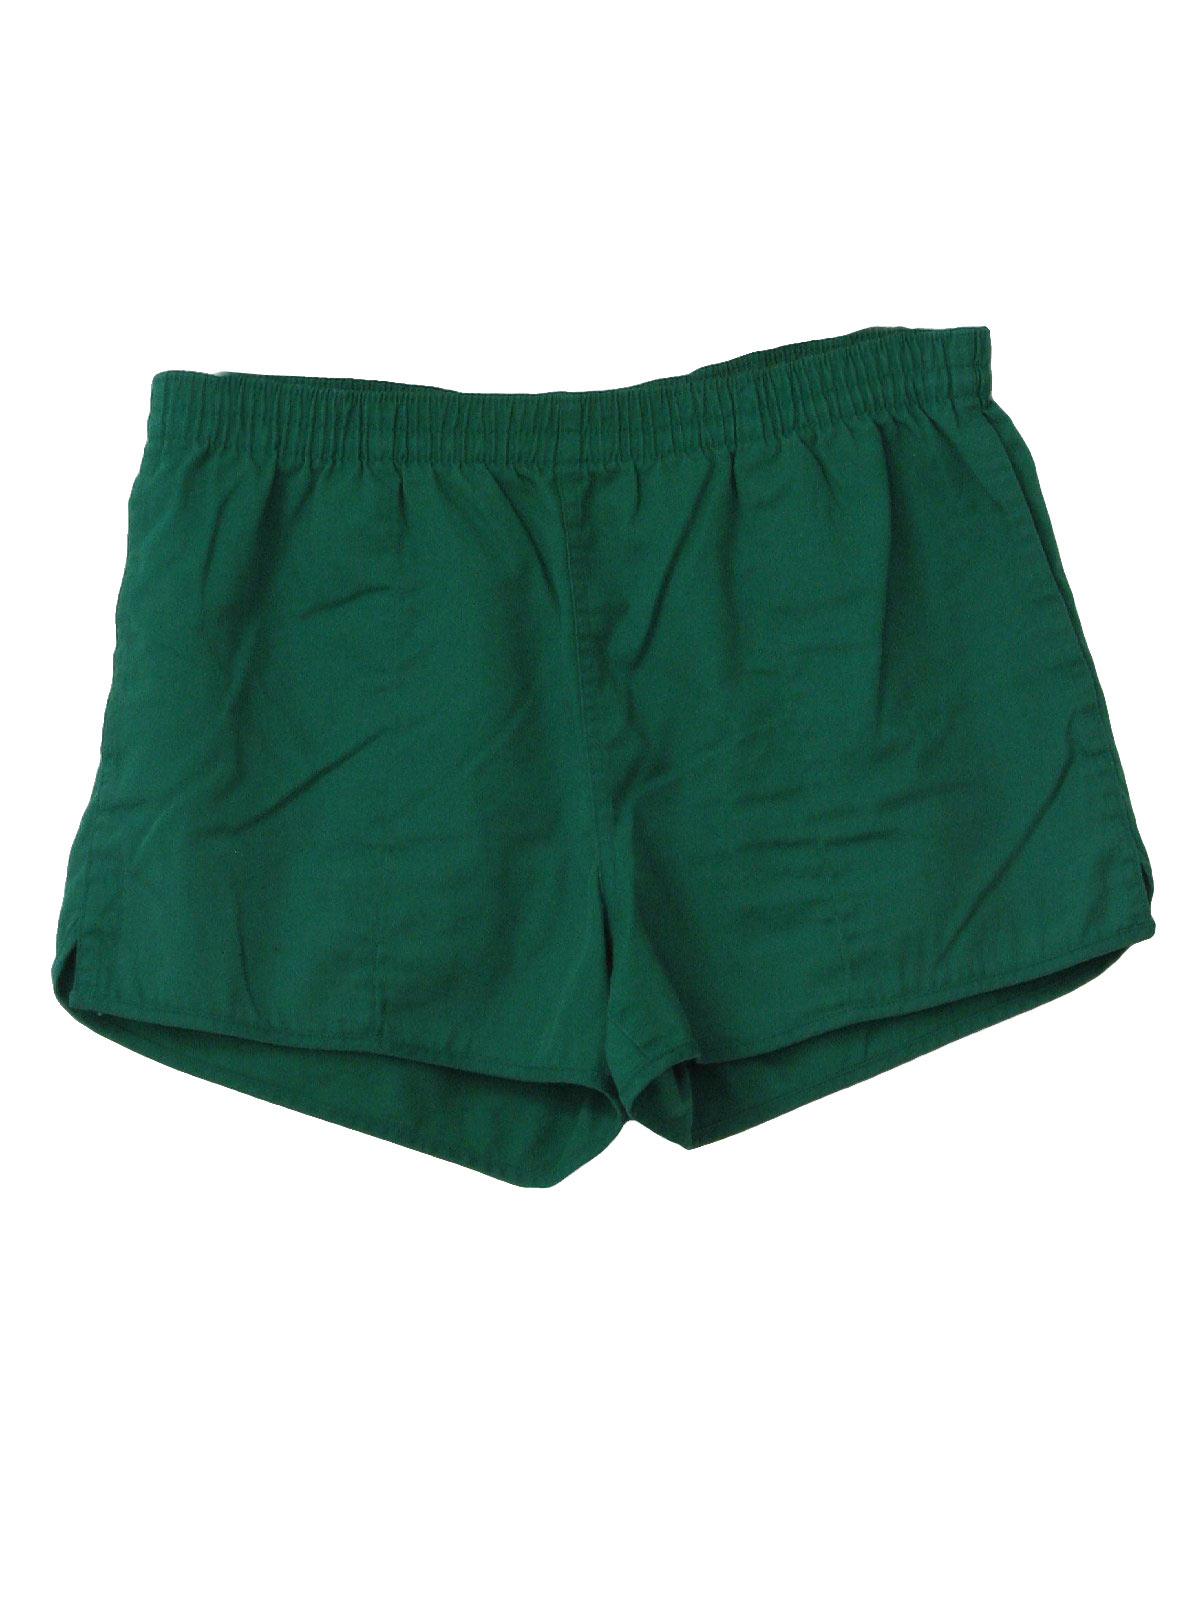 Retro 80's Shorts: 80s -Lands End- Mens green polyester and cotton ...